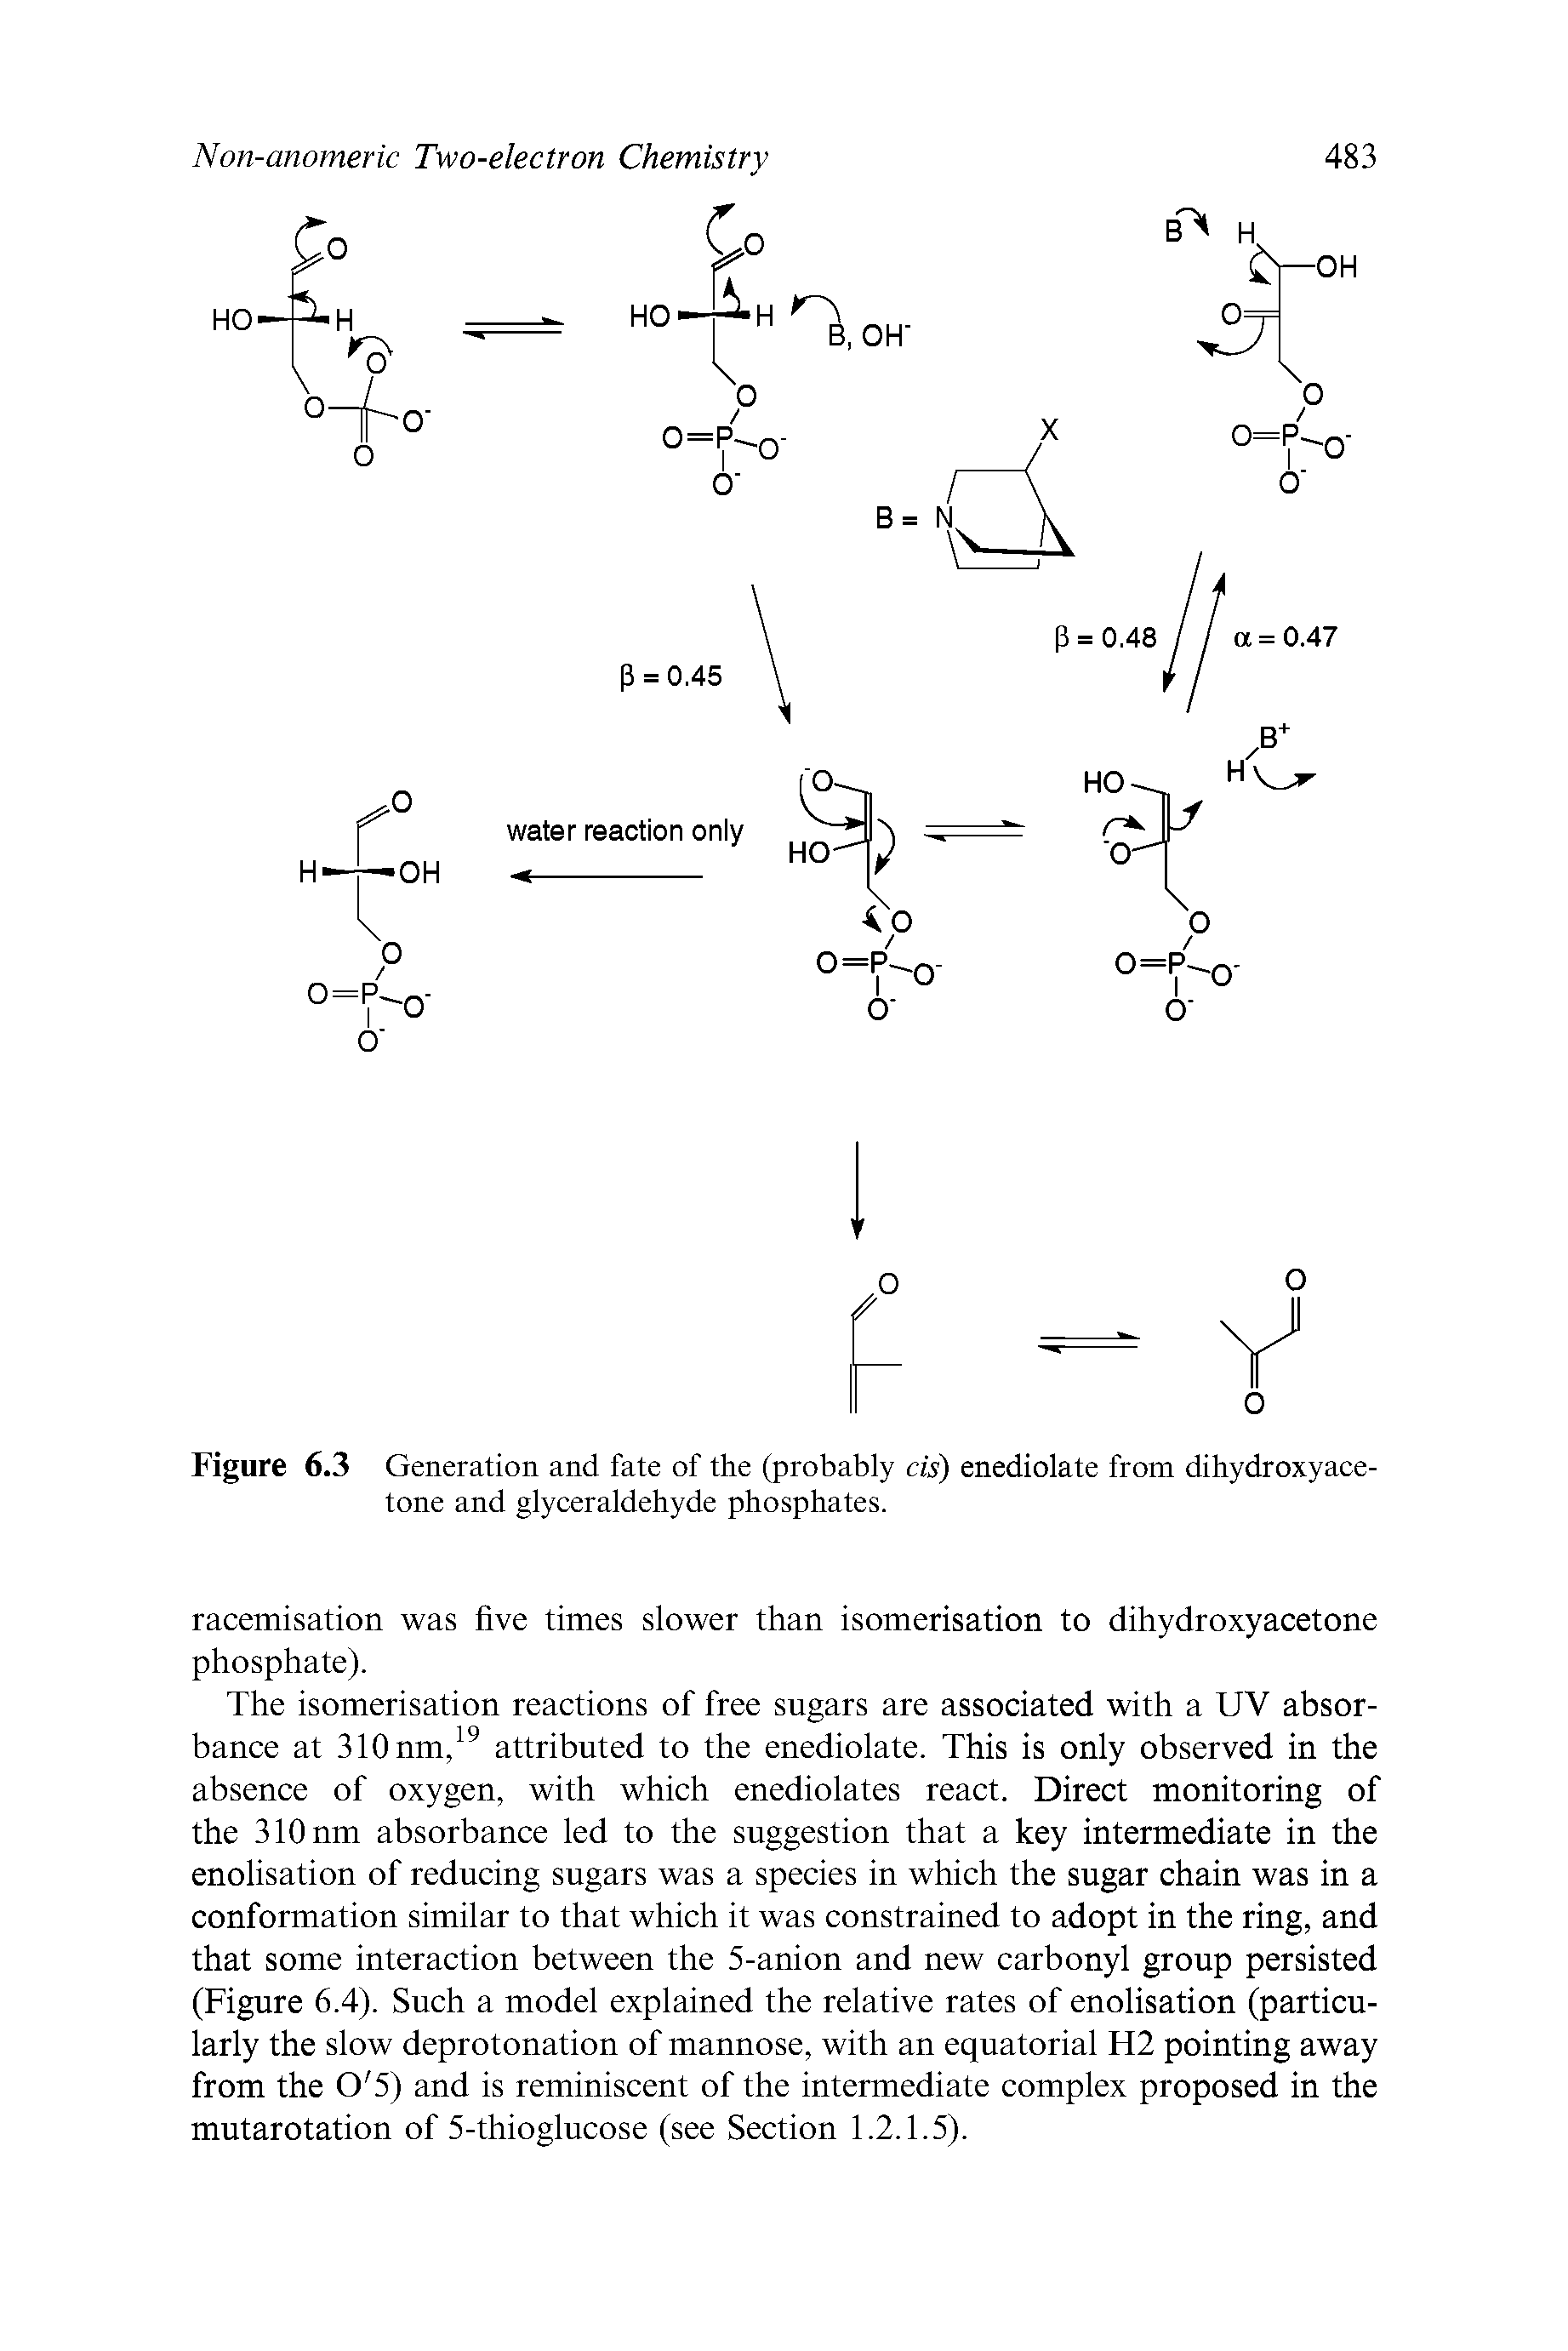 Figure 6.3 Generation and fate of the (probably cis) enediolate from dihydroxyace-tone and glyceraldehyde phosphates.